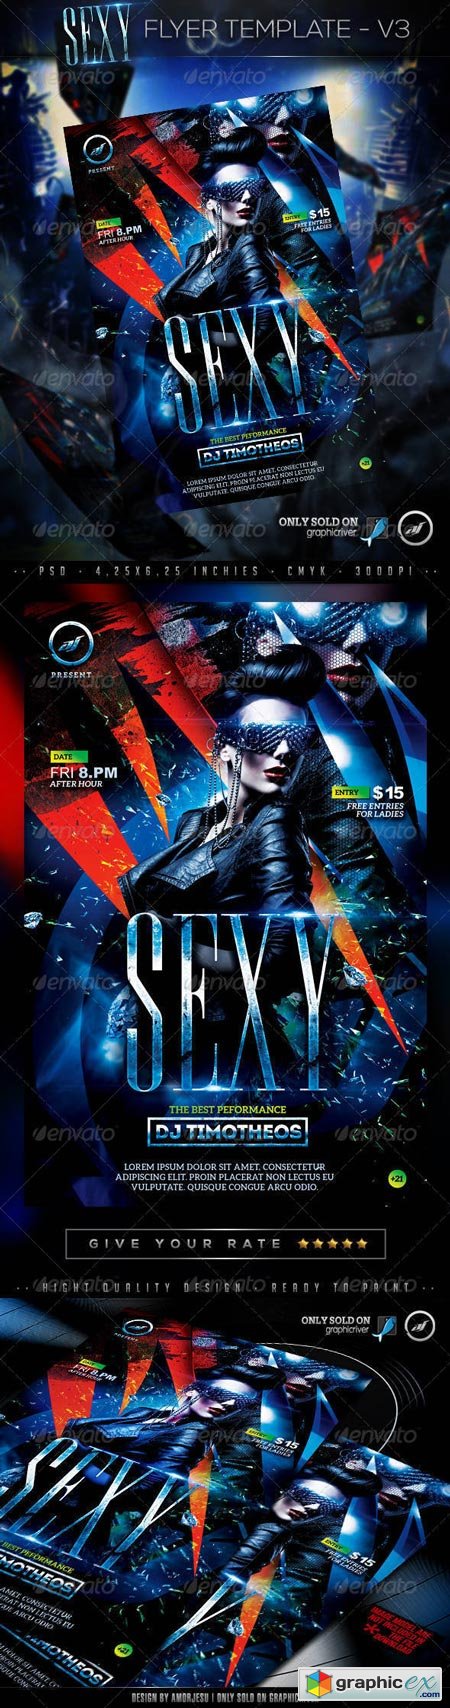 Sexy Flyer Template V3 7940352